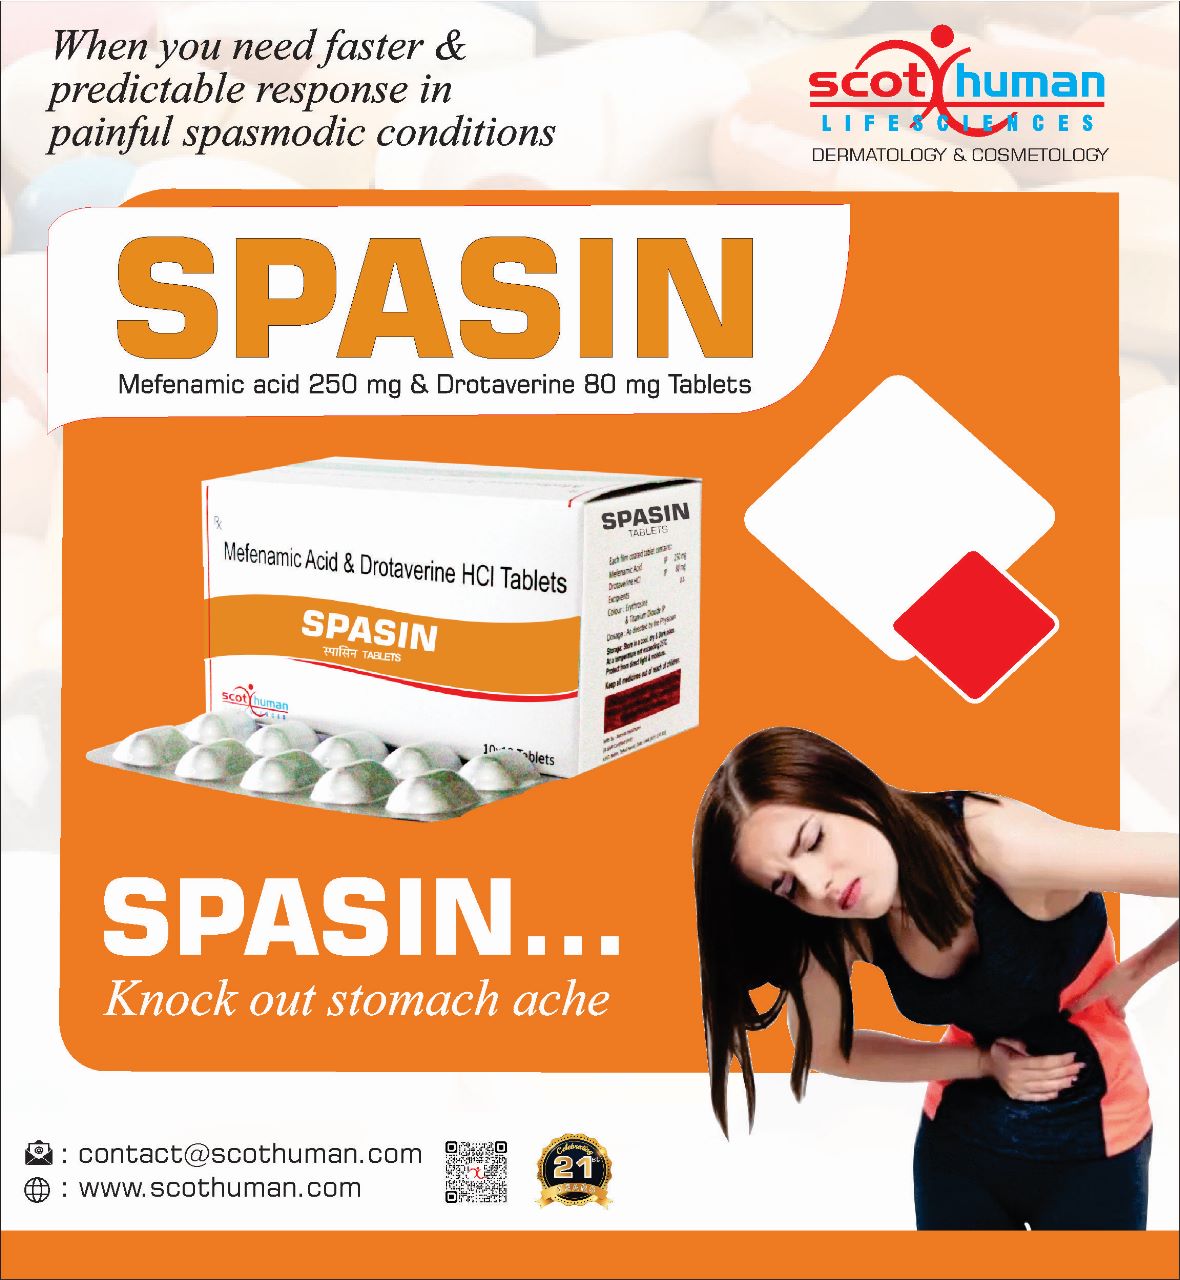 Product Name: Spasin, Compositions of Spasin are Mefenamic Acid & Drotaveriene Hcl Tablets - Pharma Drugs and Chemicals